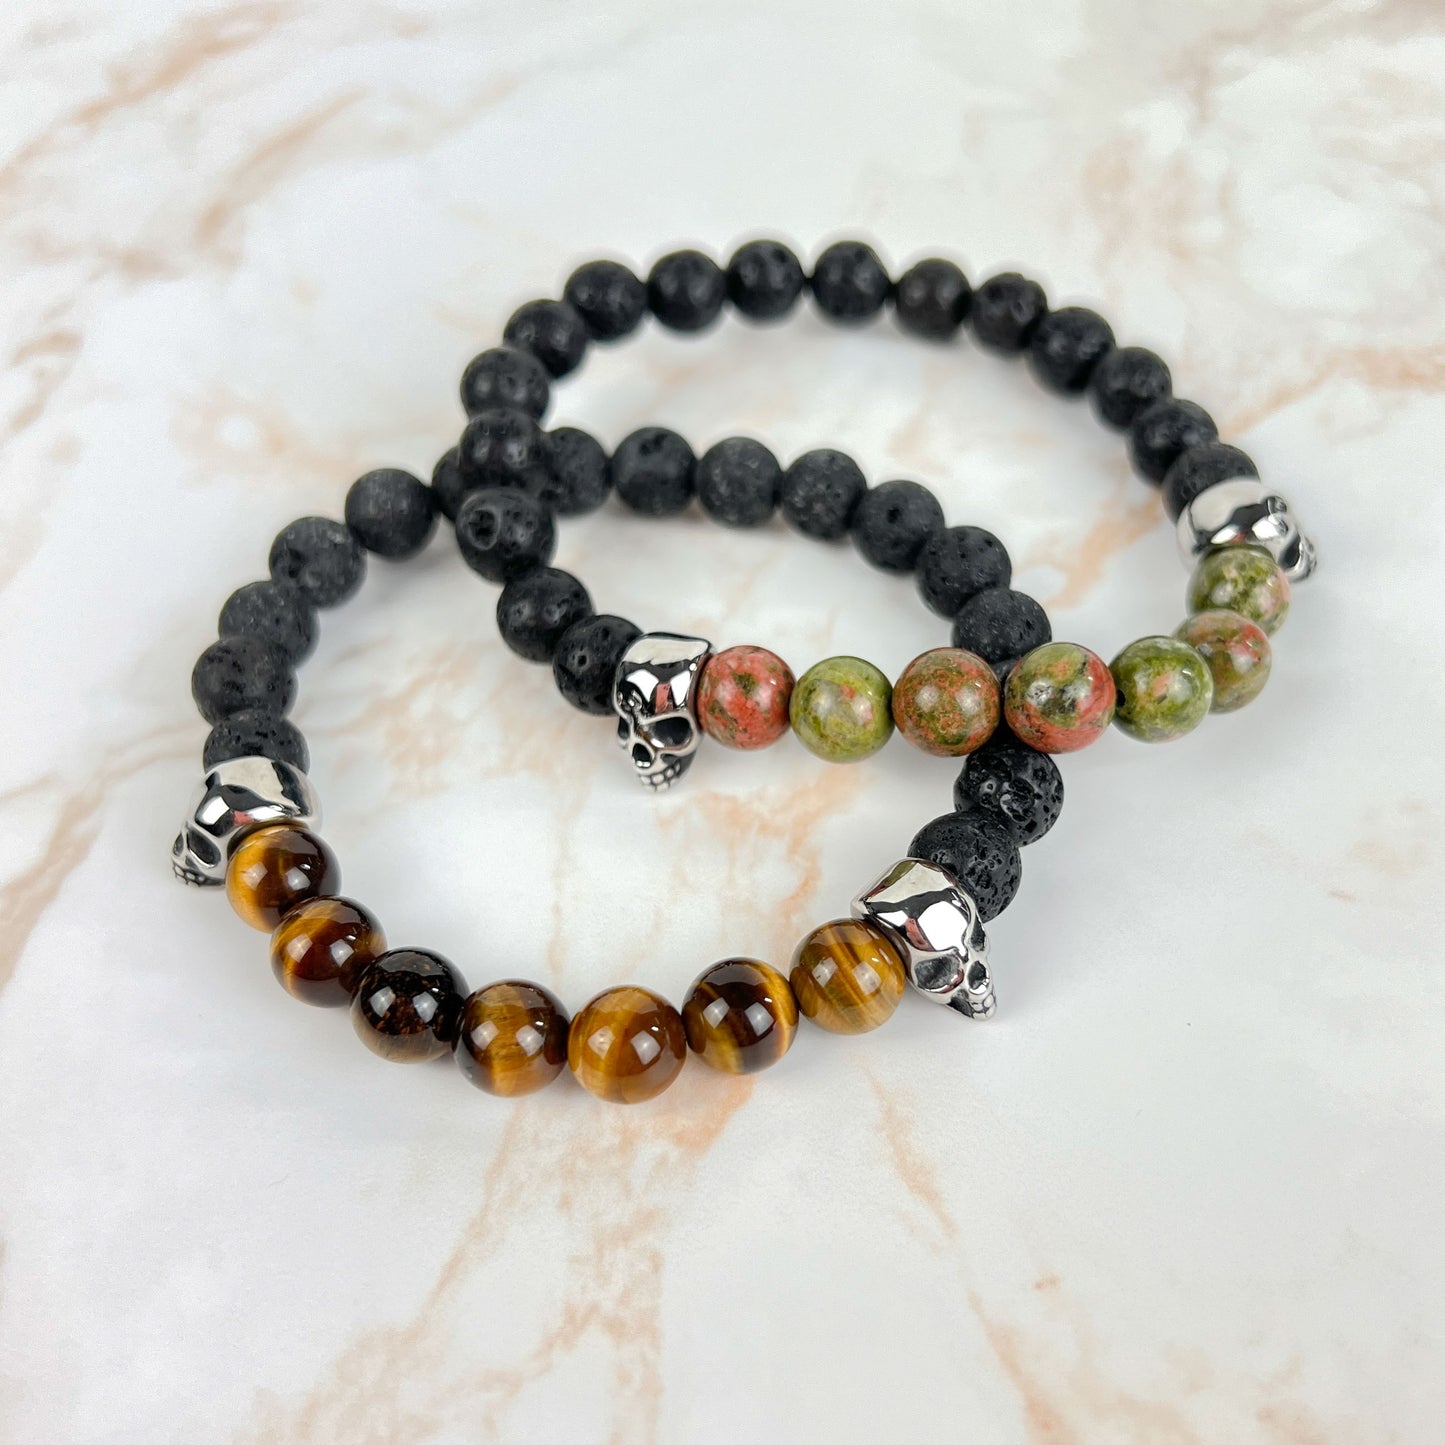 Lava rock and unakite or tiger's eye mala bracelet, with stainless steel skulls Baguette Magick